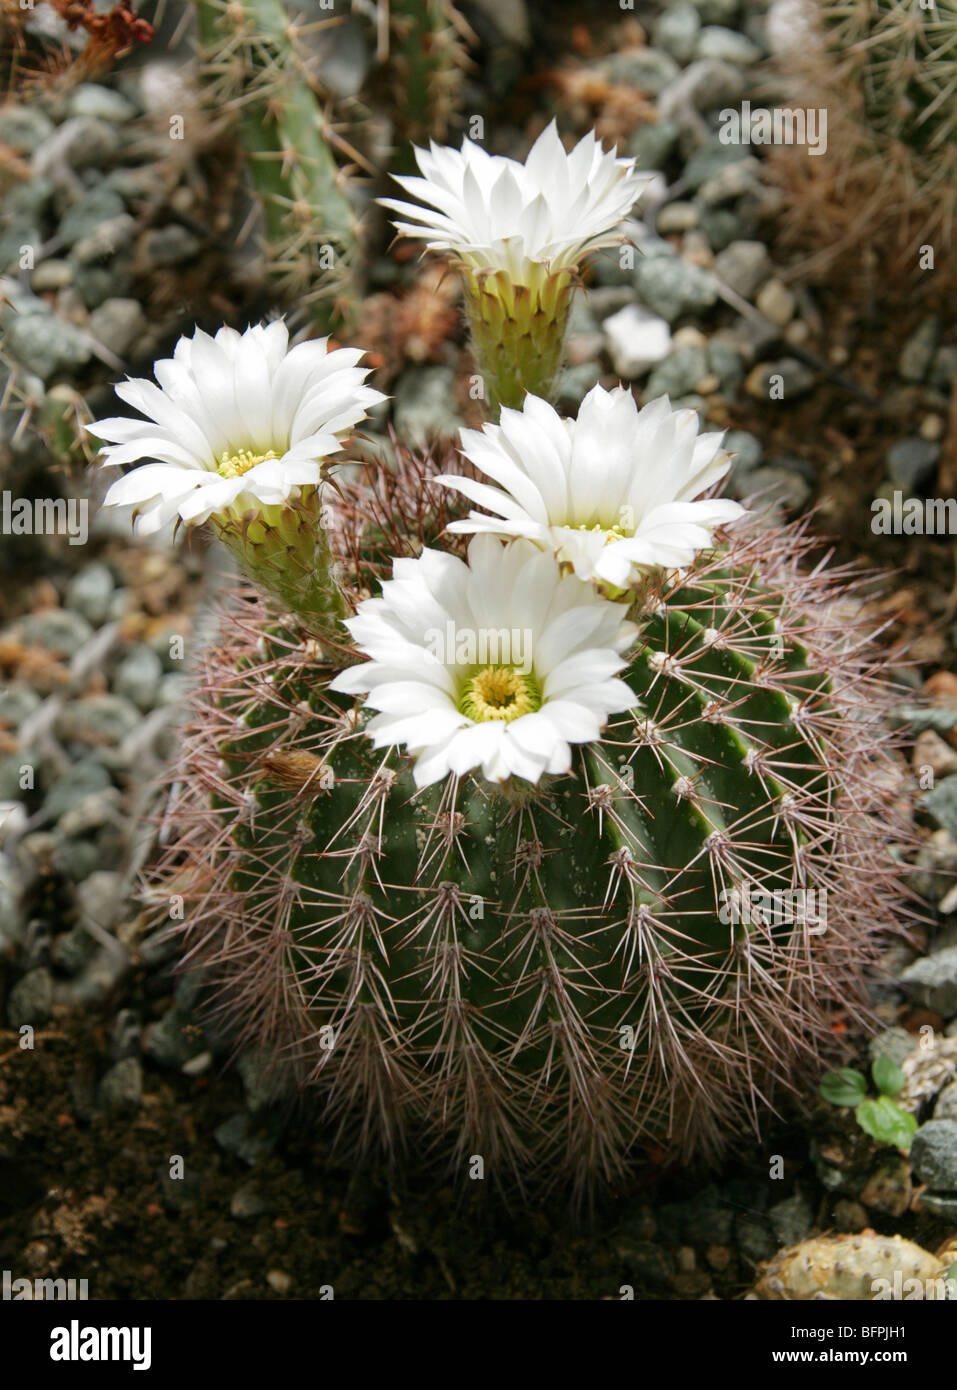 Echinopsis spiniflora, Cactaceae, North West Argentina, South America Stock Photo